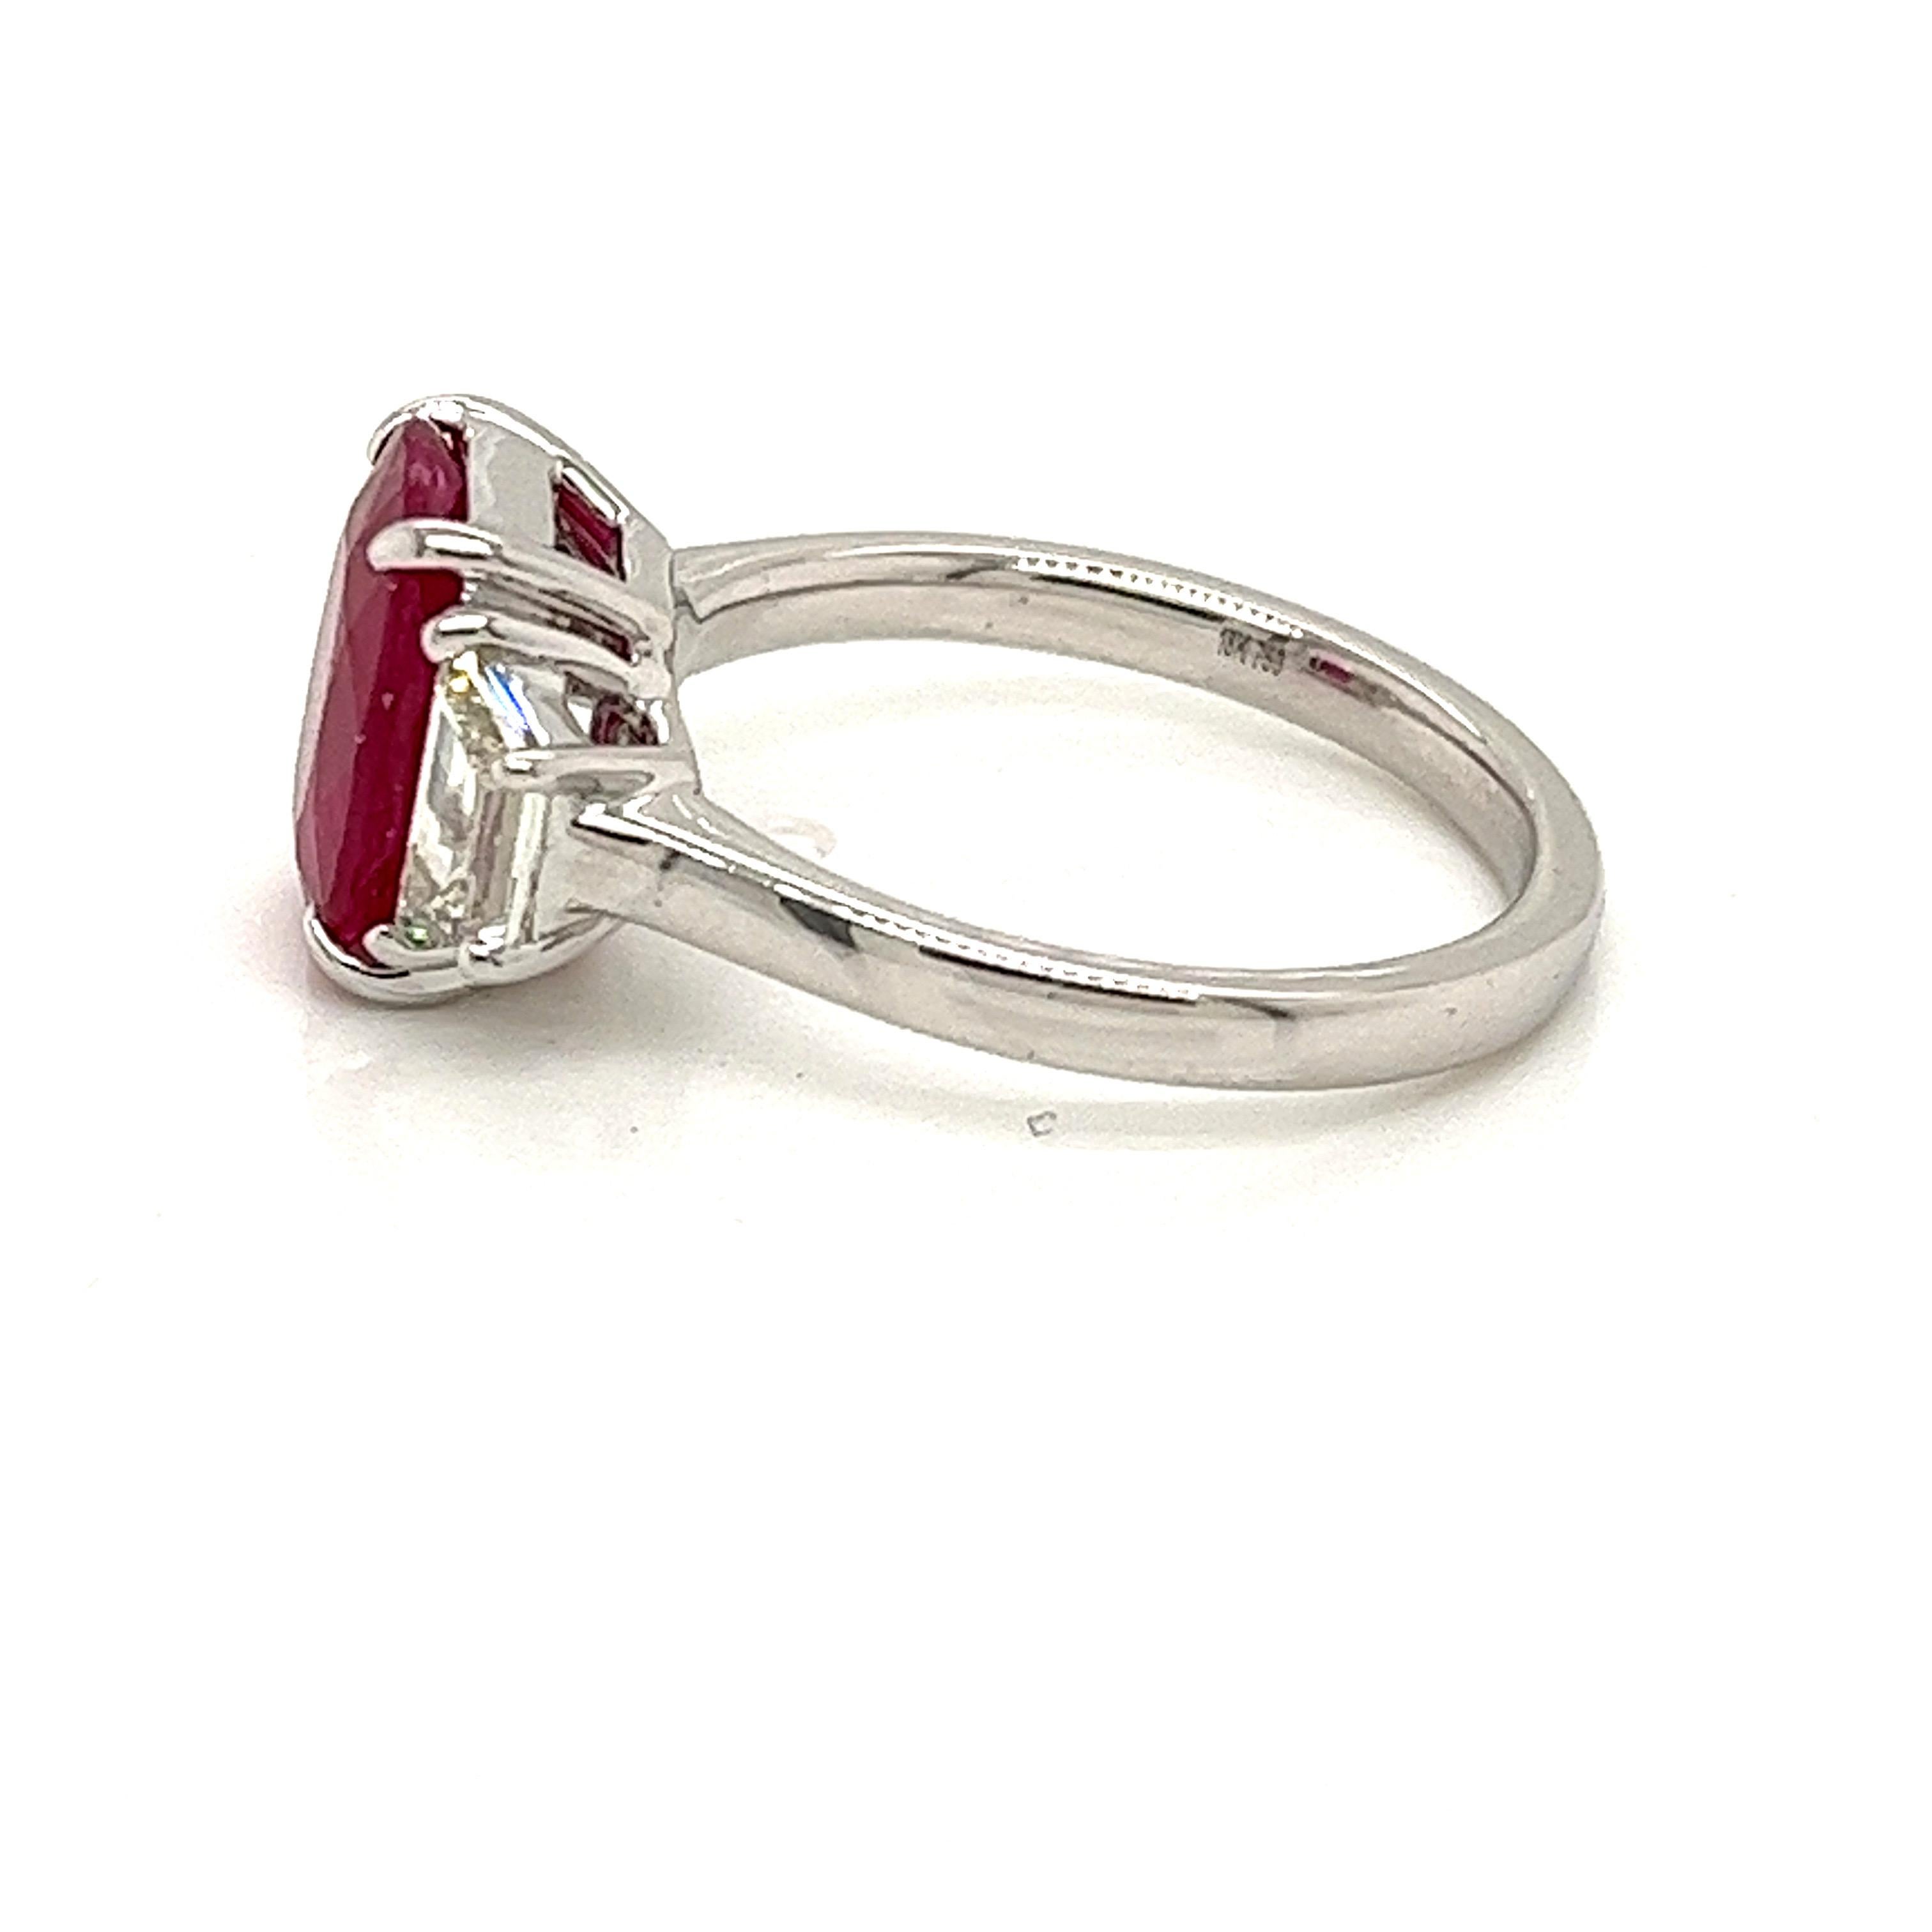 Modern Certified 3.12 Carat Oval Mozambique Ruby & Diamond Ring in 18 Karat White Gold For Sale